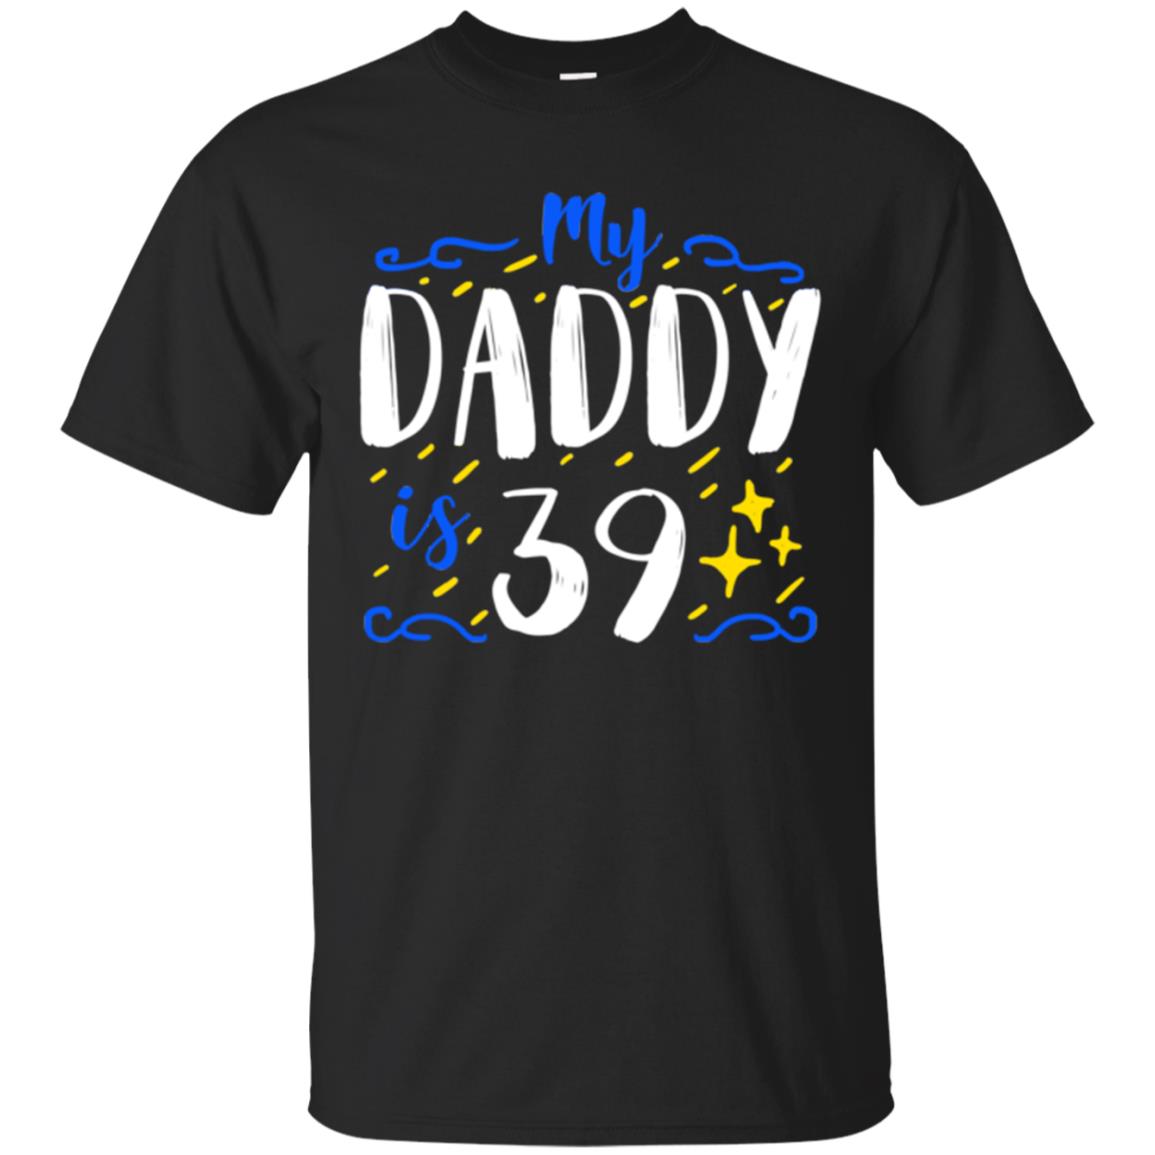 My Daddy Is 39 39th Birthday Daddy Shirt For Sons Or DaughtersG200 Gildan Ultra Cotton T-Shirt